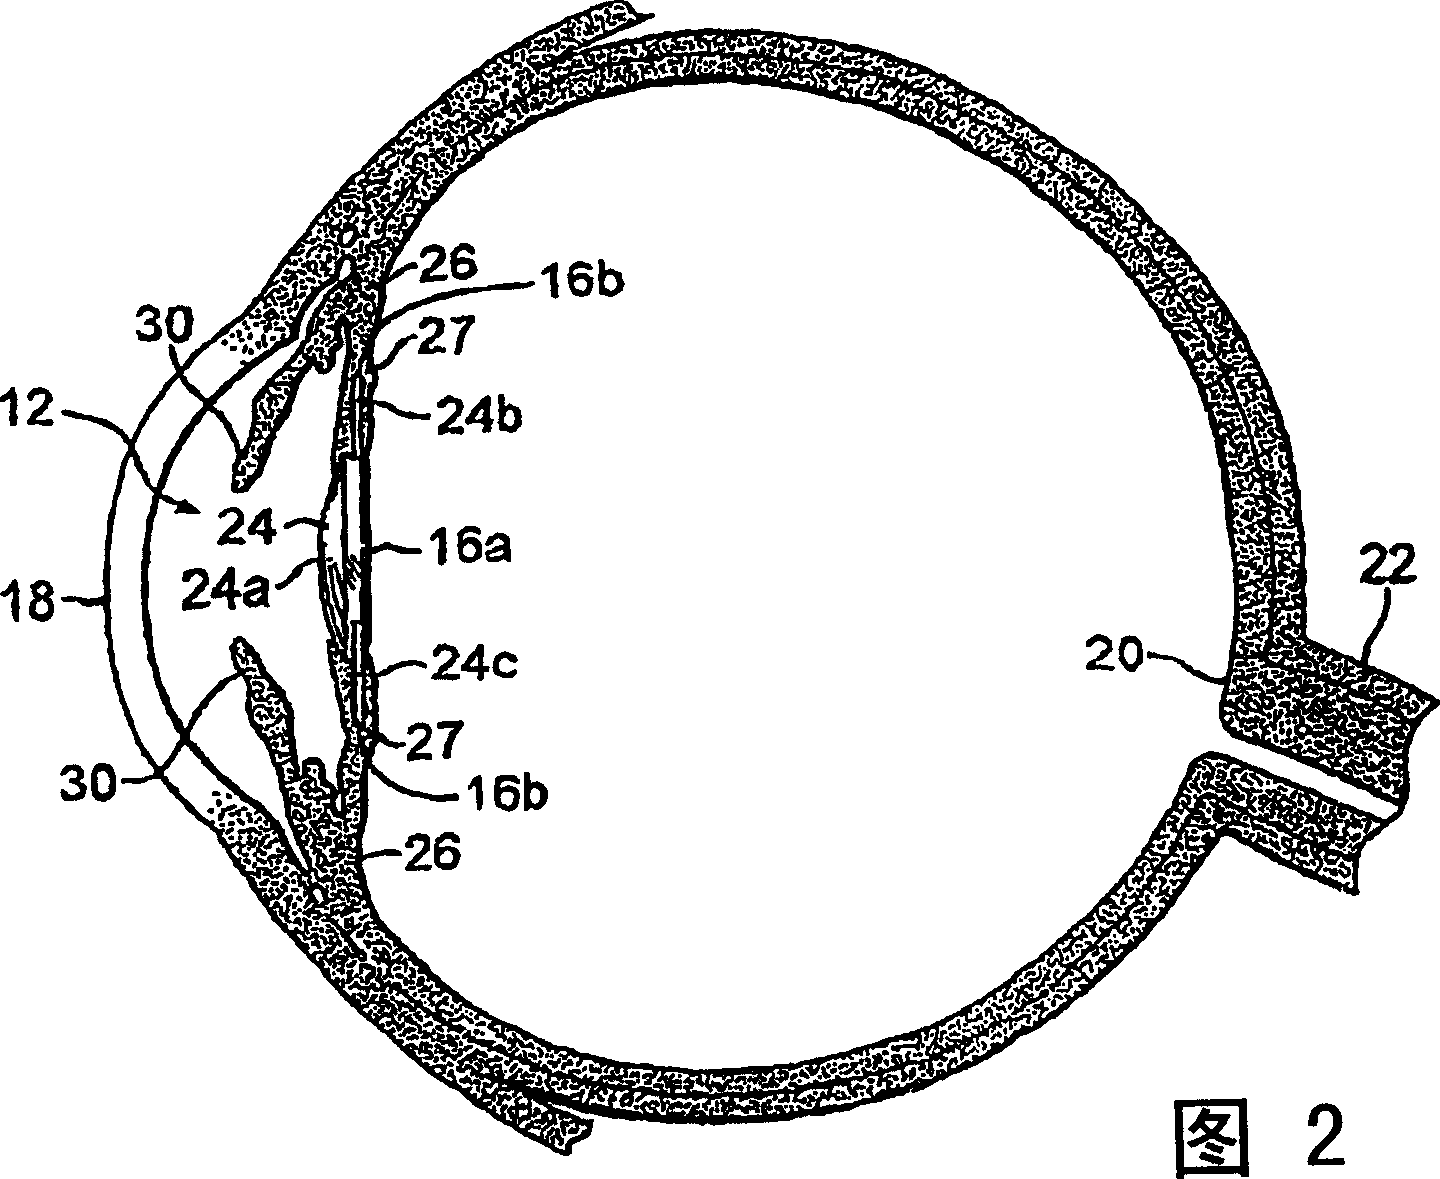 Intraocular lens for inhibiting pco and aco